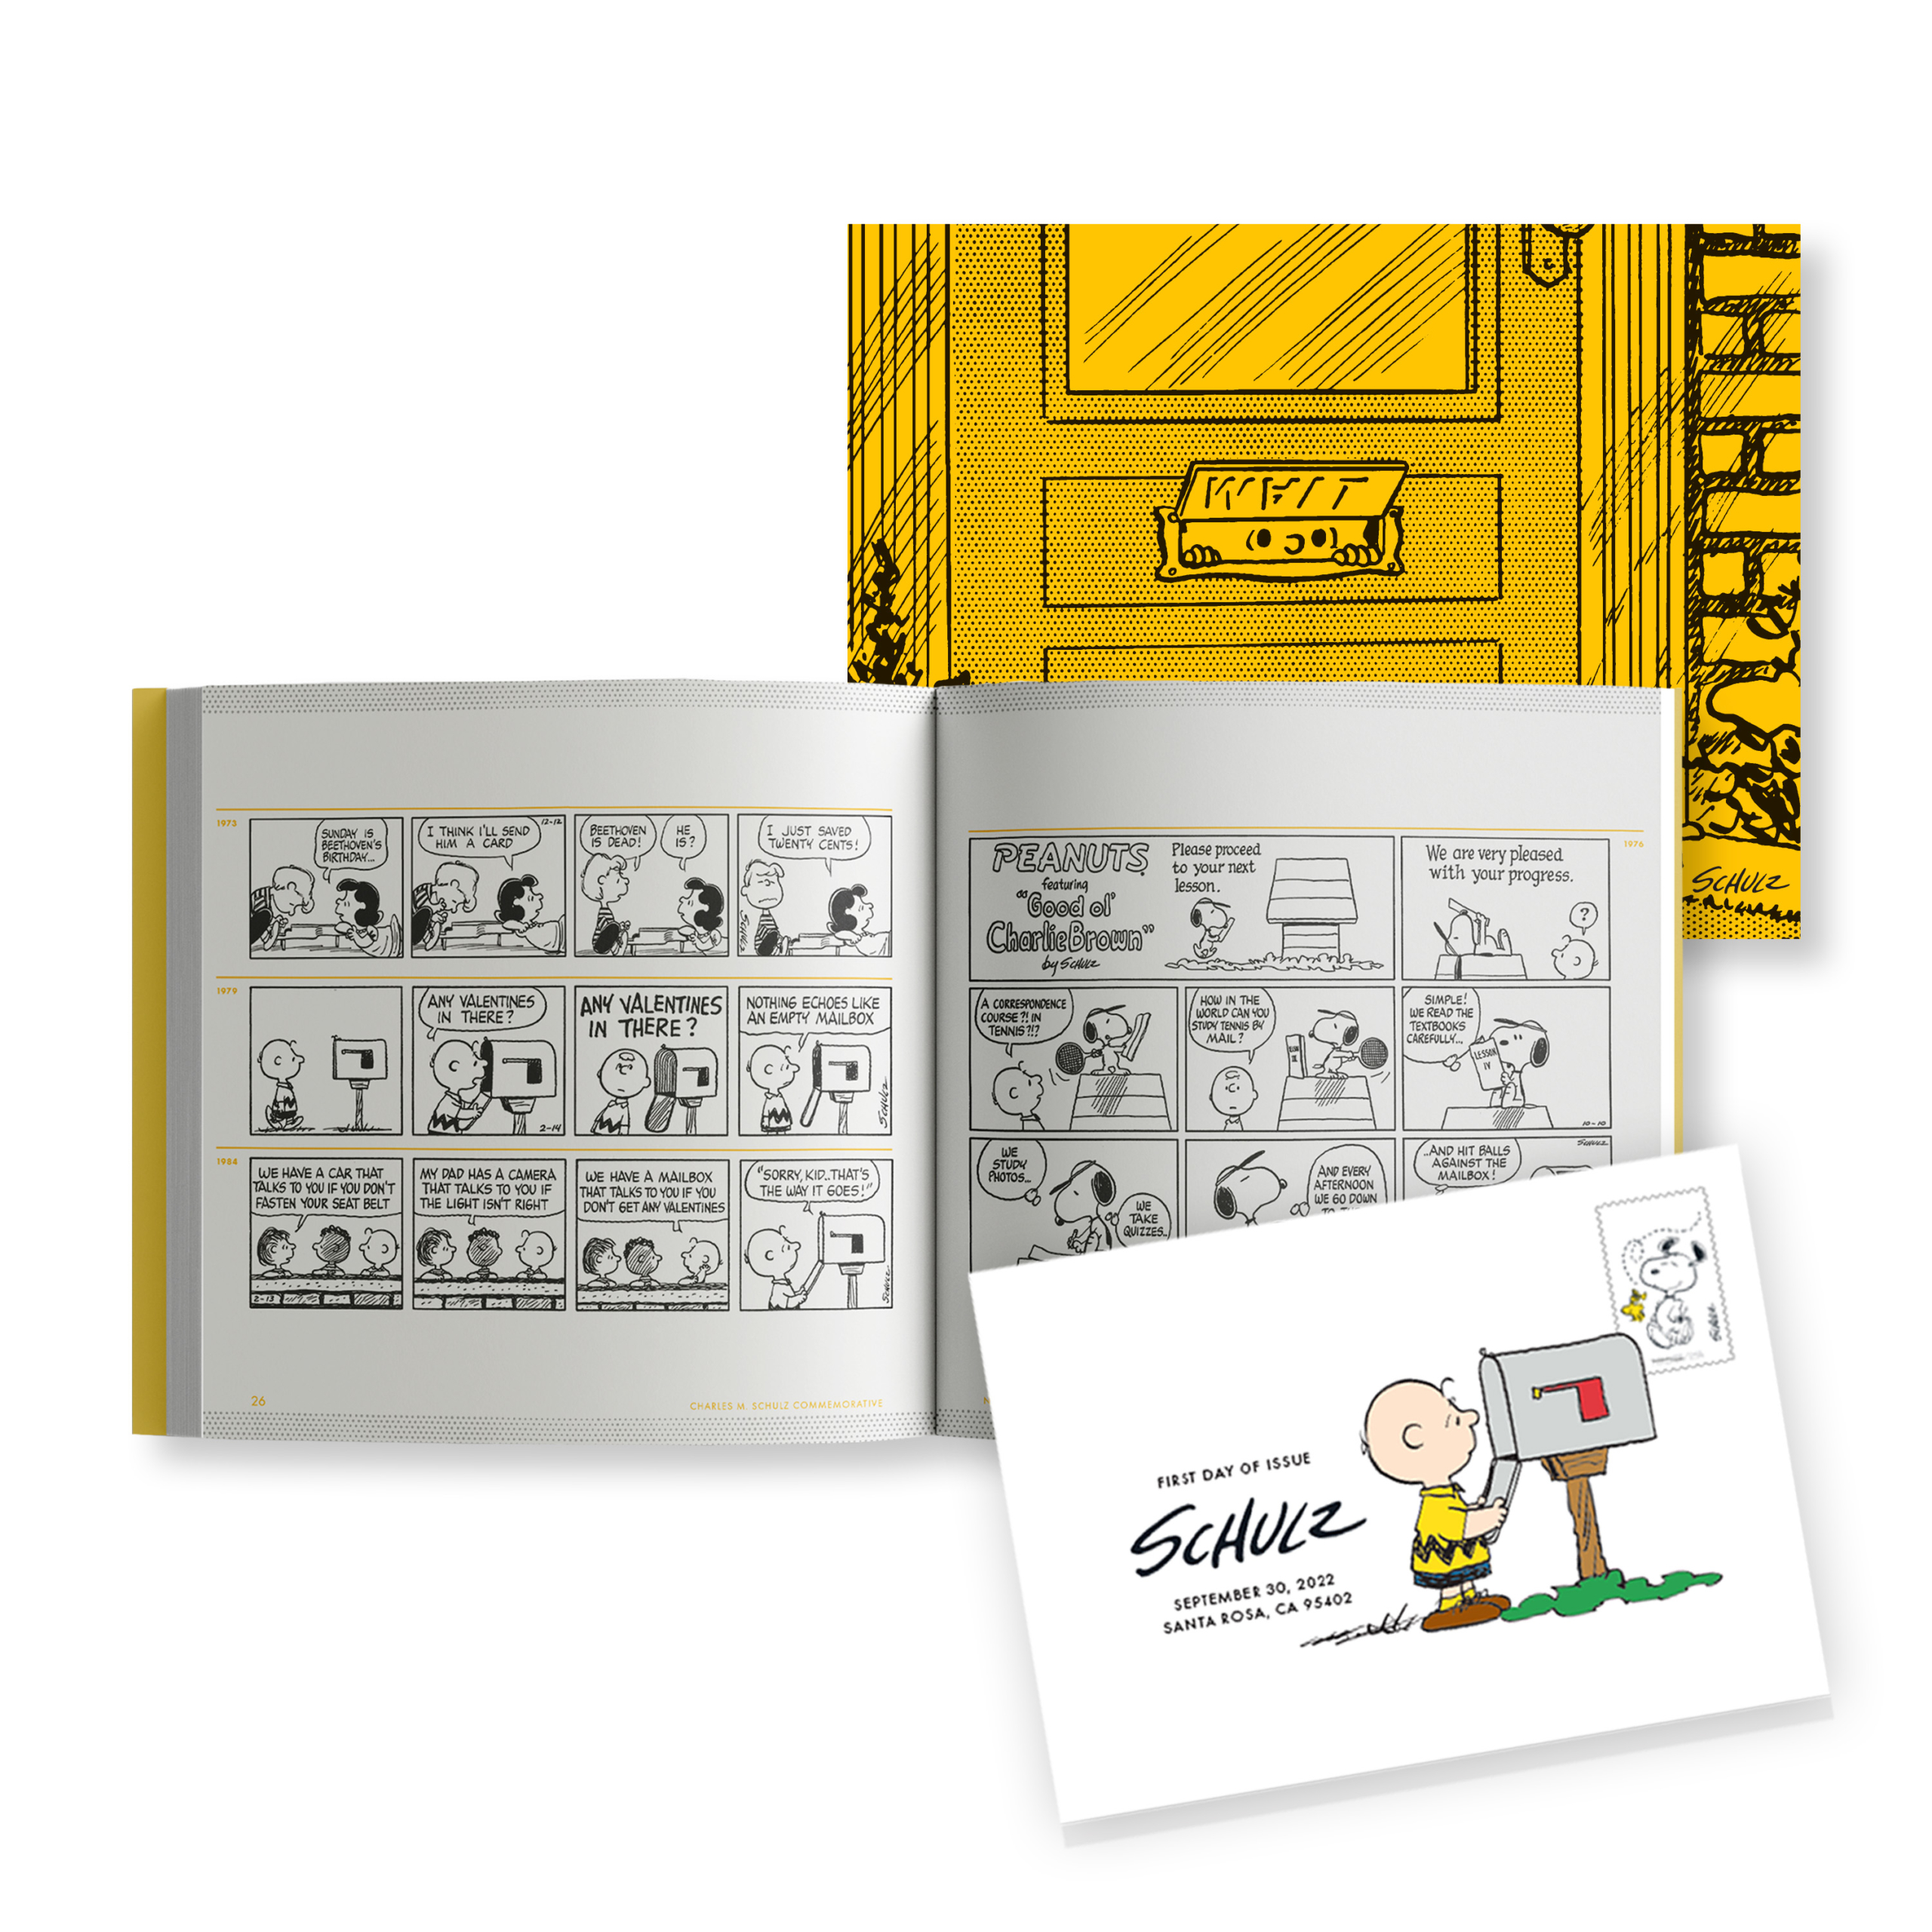 Charlie Brown, Snoopy and their friends land on U.S. postal stamps